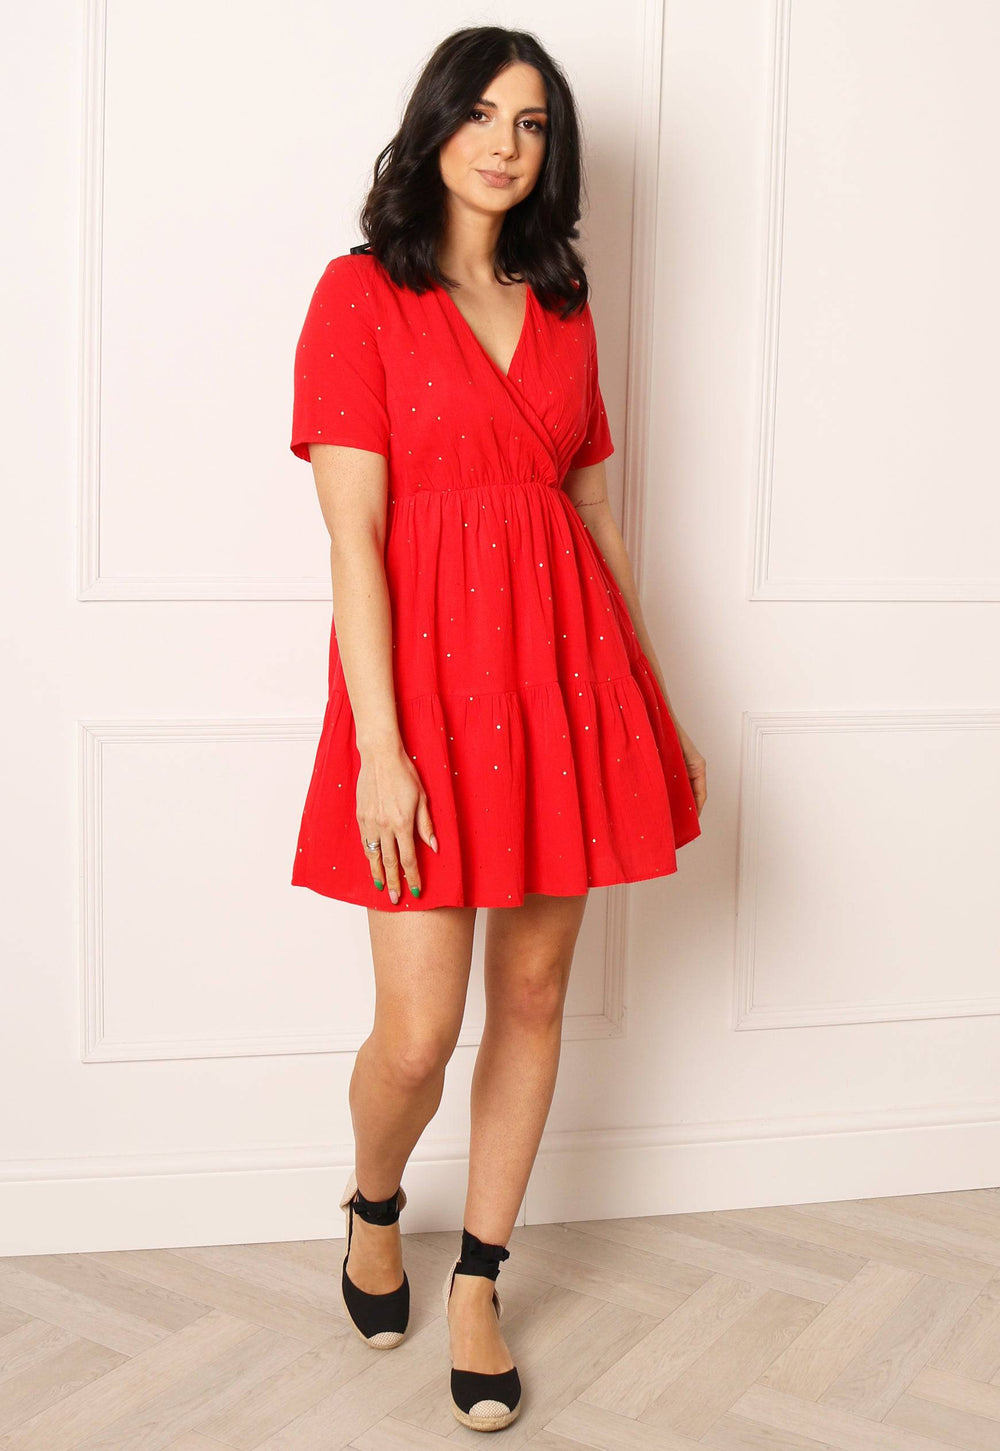 PIECES Vianna Linen Short Sleeve Mini Wrap Dress in Red with Gold Spots - One Nation Clothing